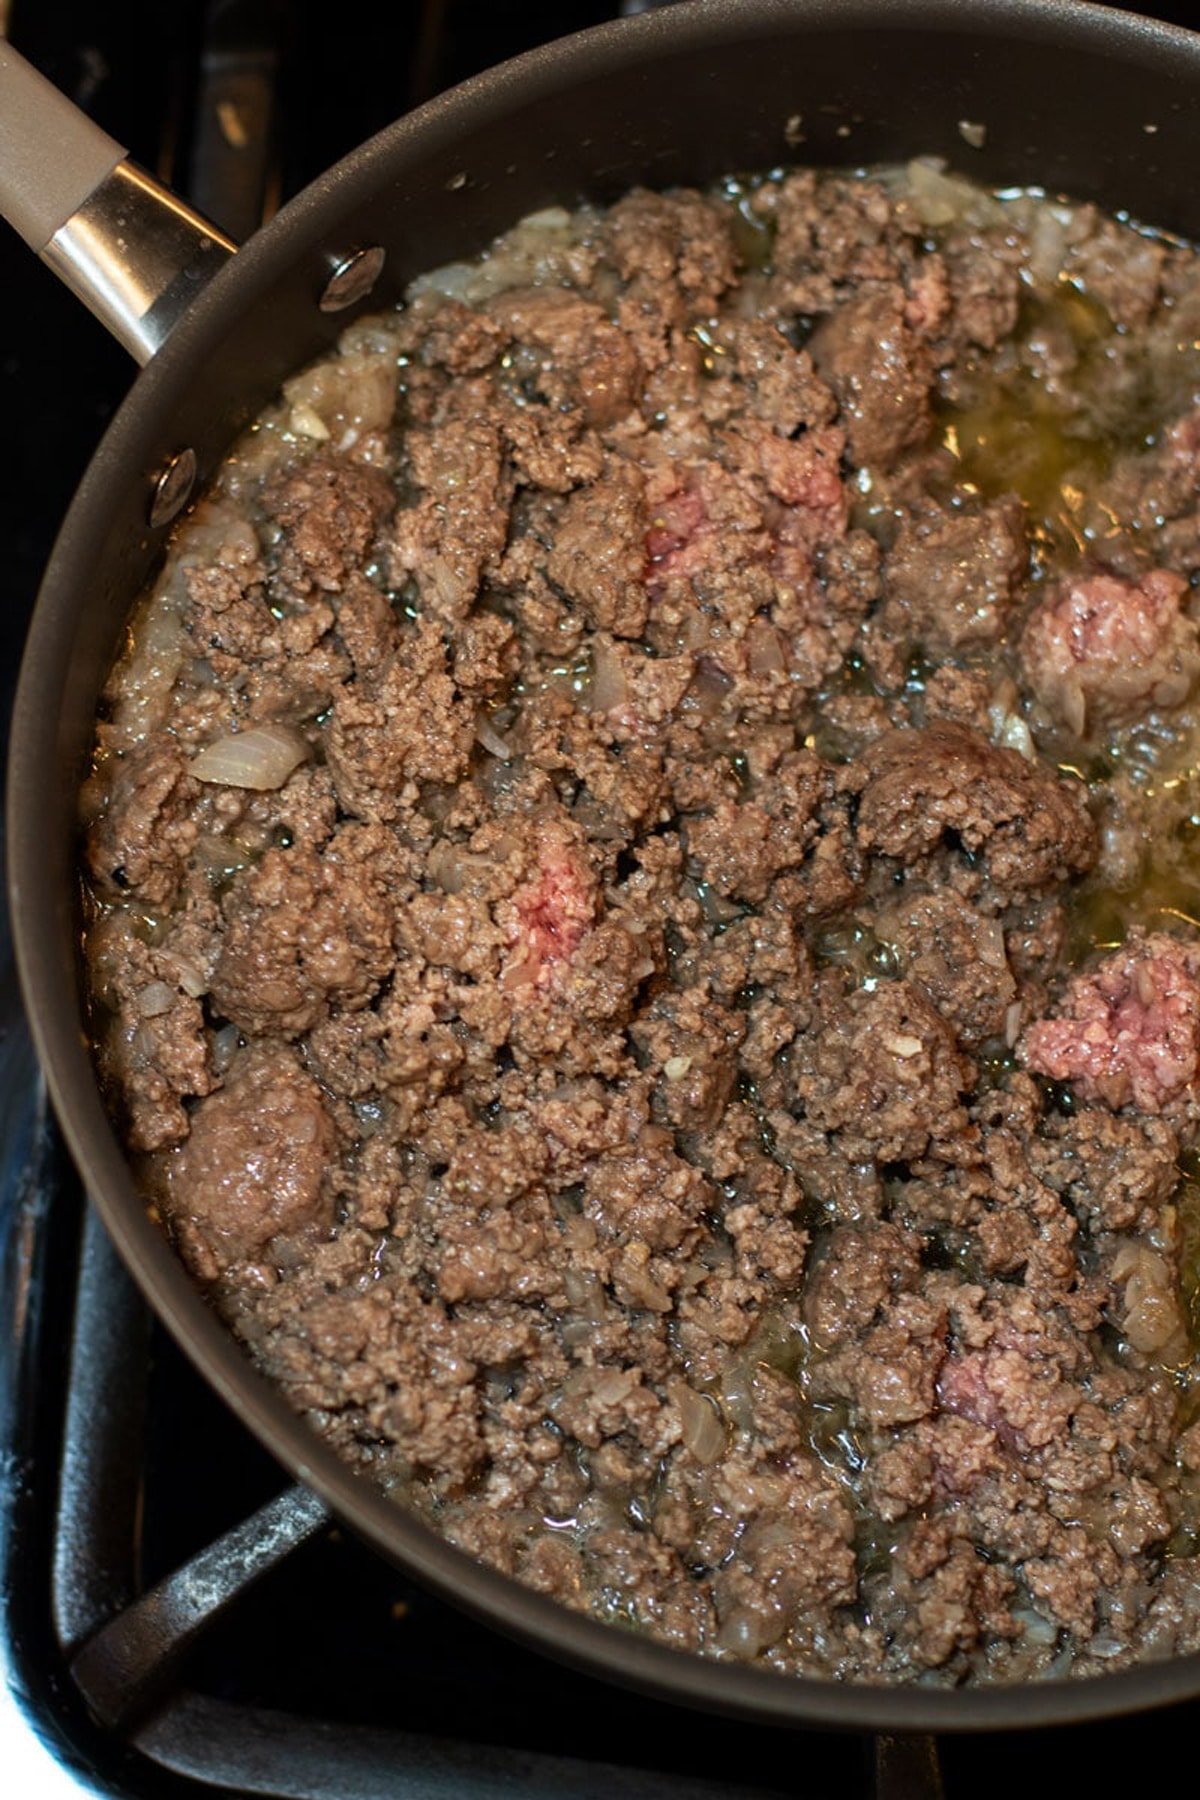 Ground beef and onions browning in a skillet.